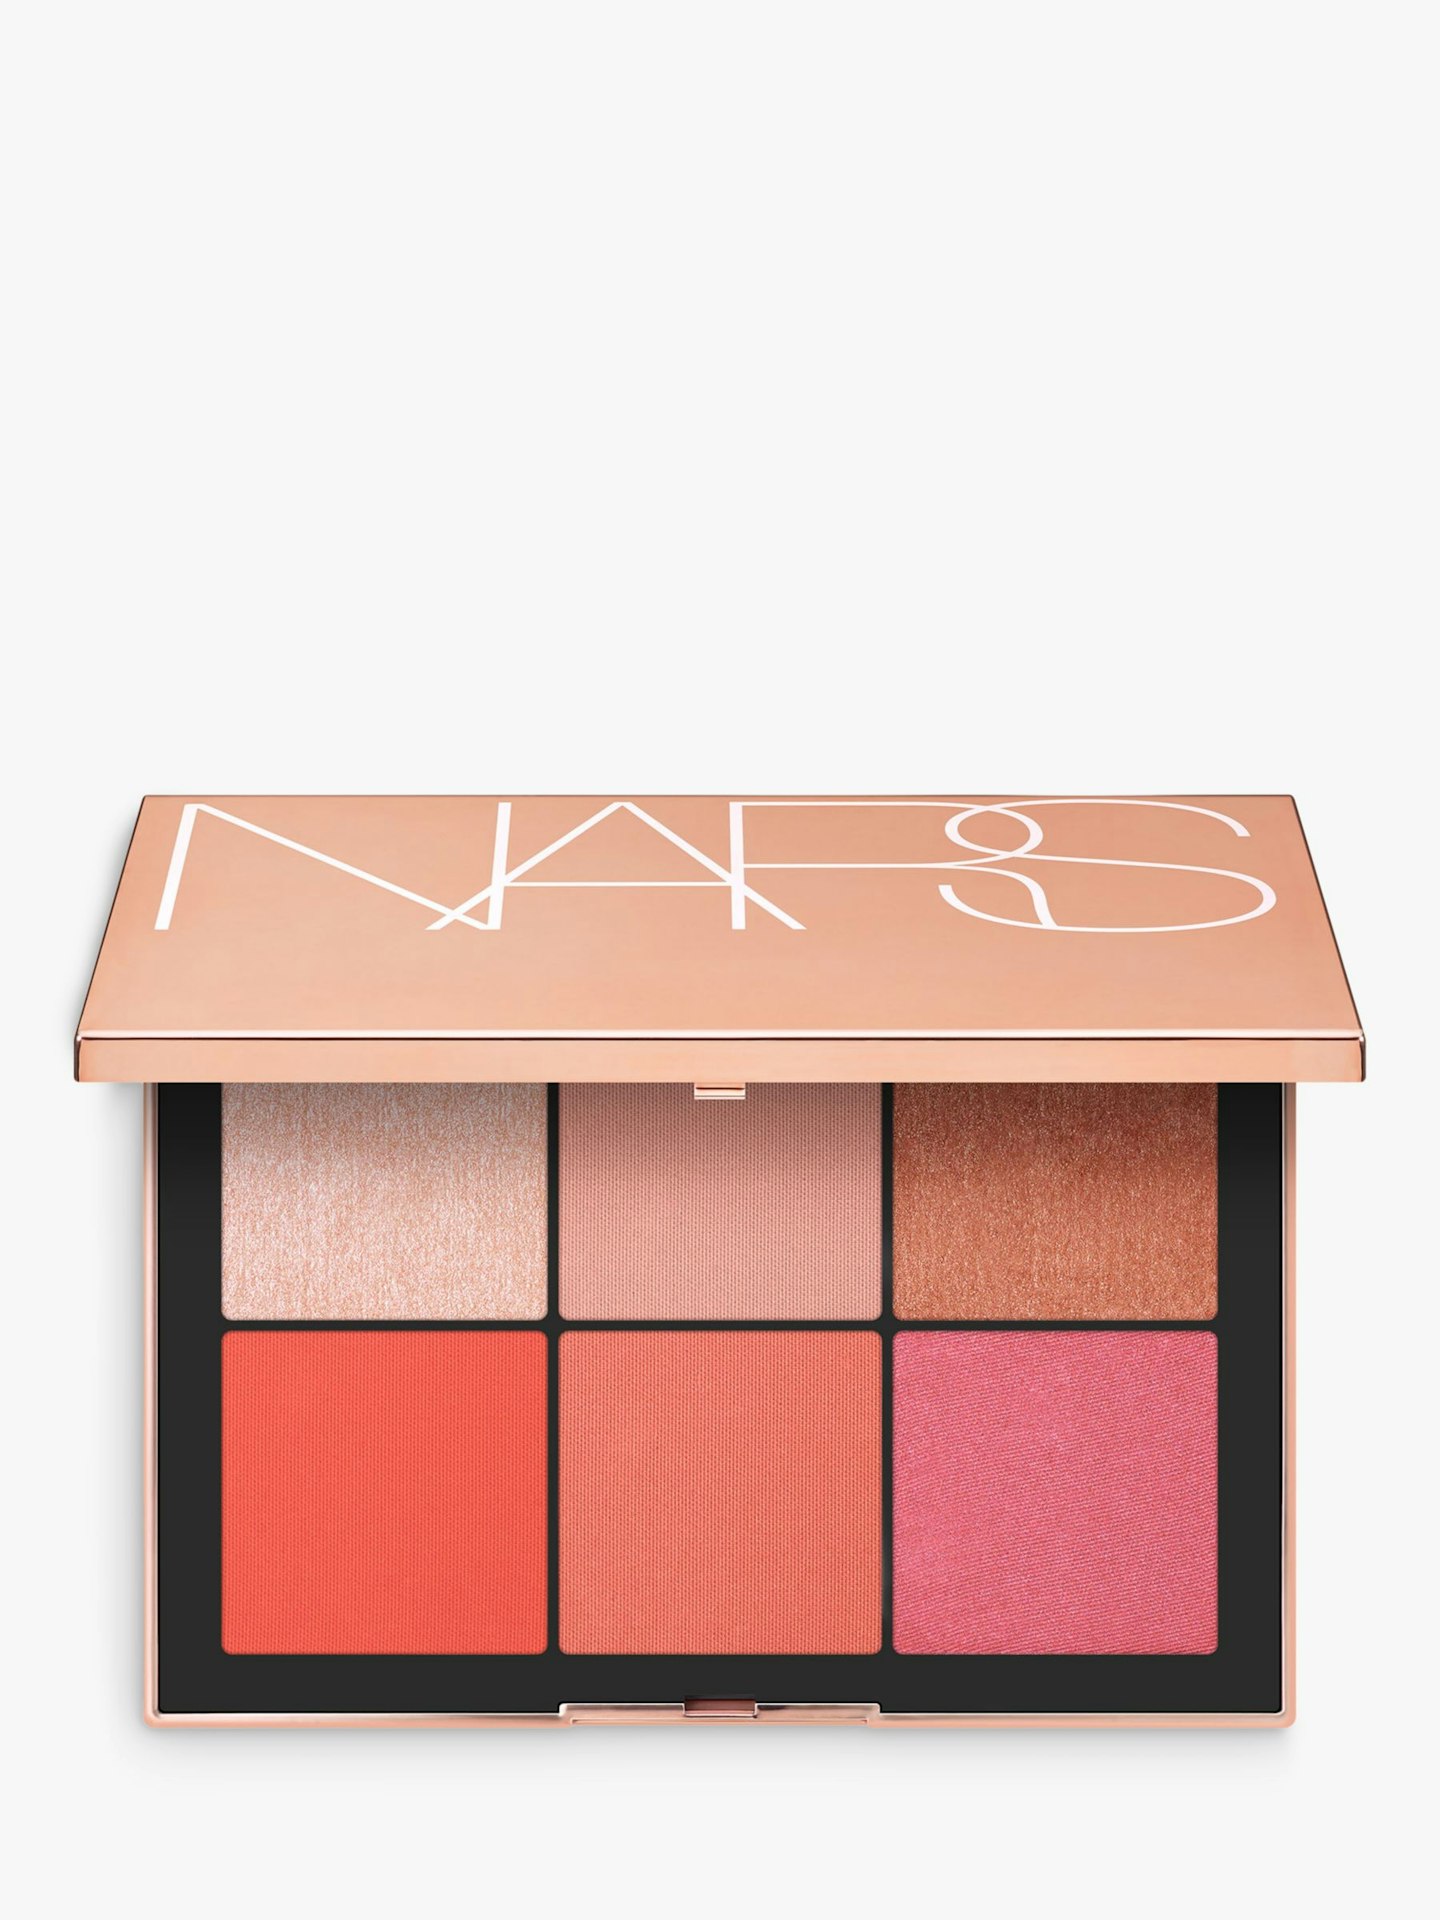 lunchtime shop Monday NARS, Afterglow Cheek Palette Multi, £46